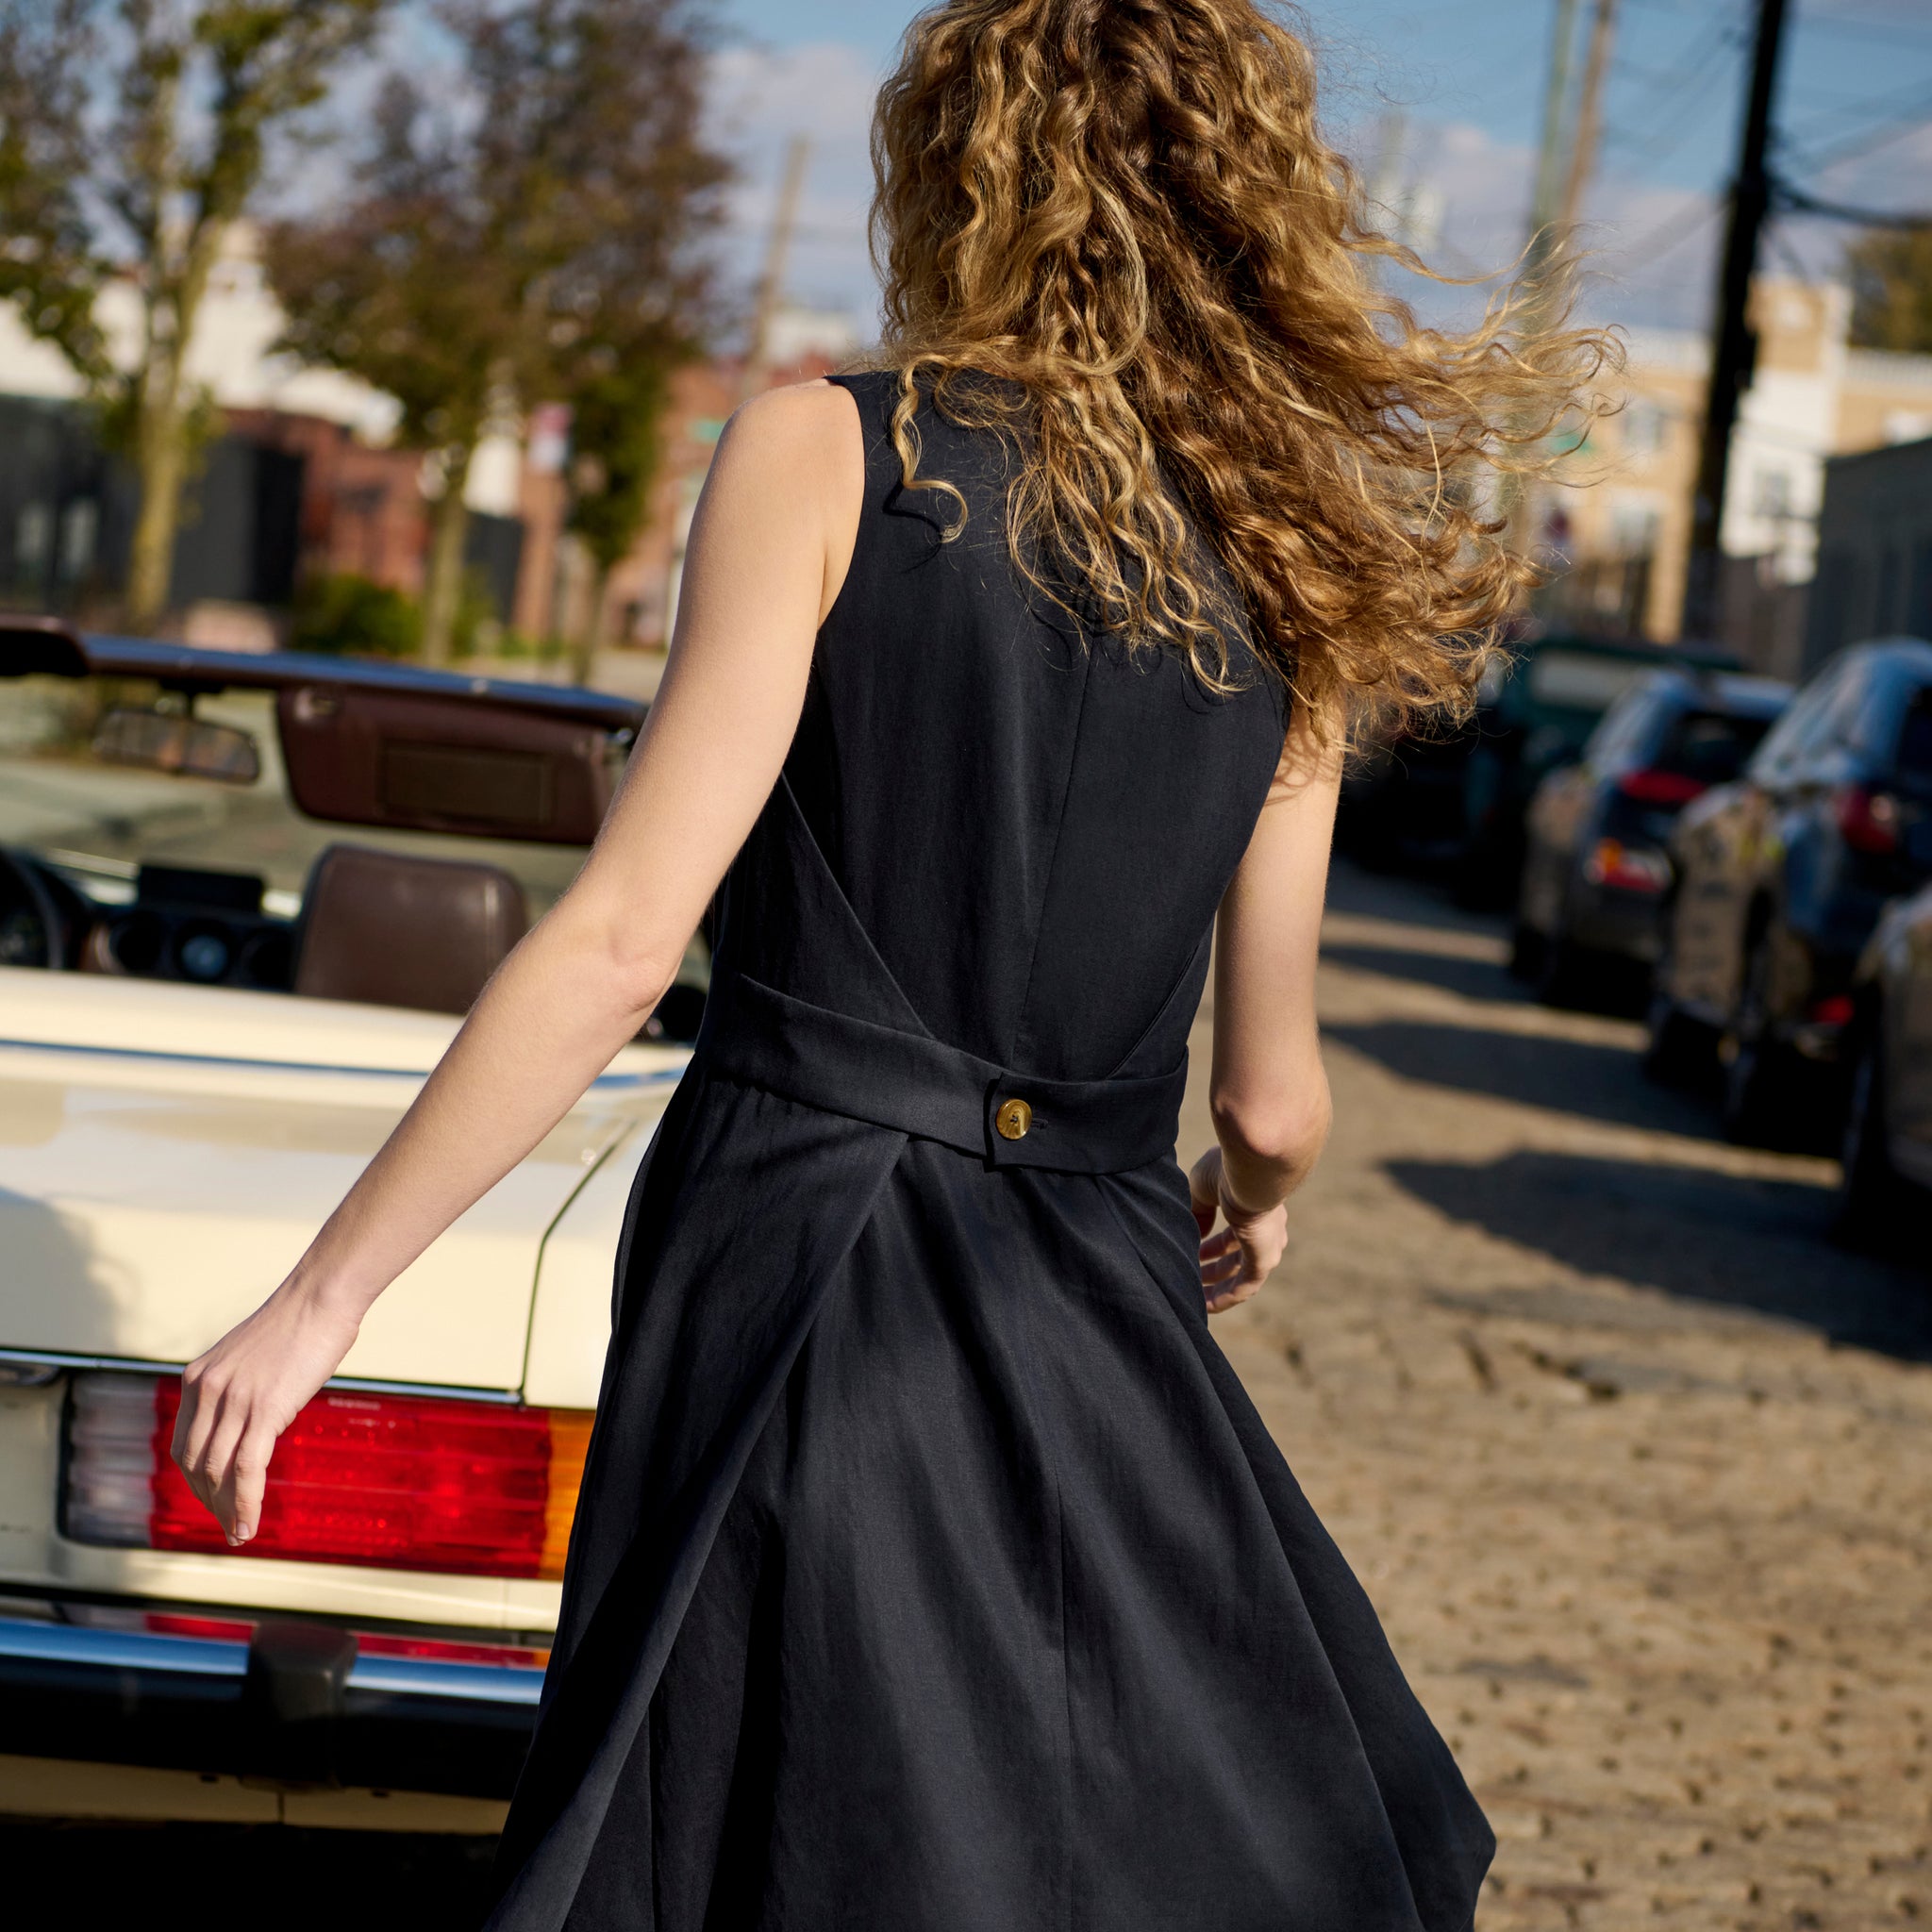 Back image of a woman wearing the Estela Dress in Night